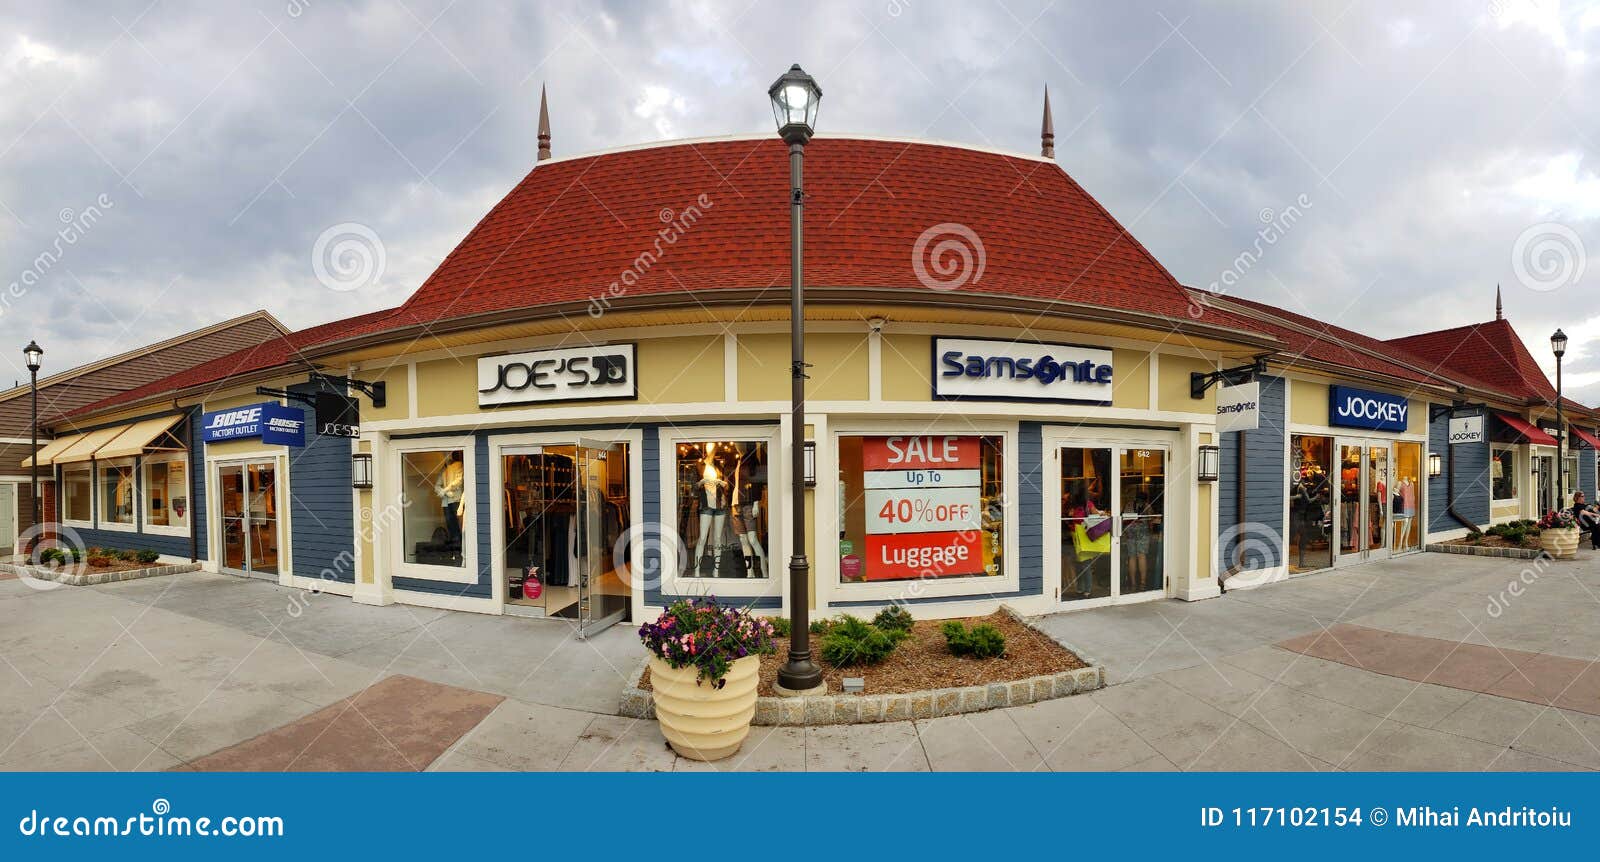 Store Panorama In Woodbury Common Premium Outlet Mall Editorial Stock Image - Image of briefcase ...